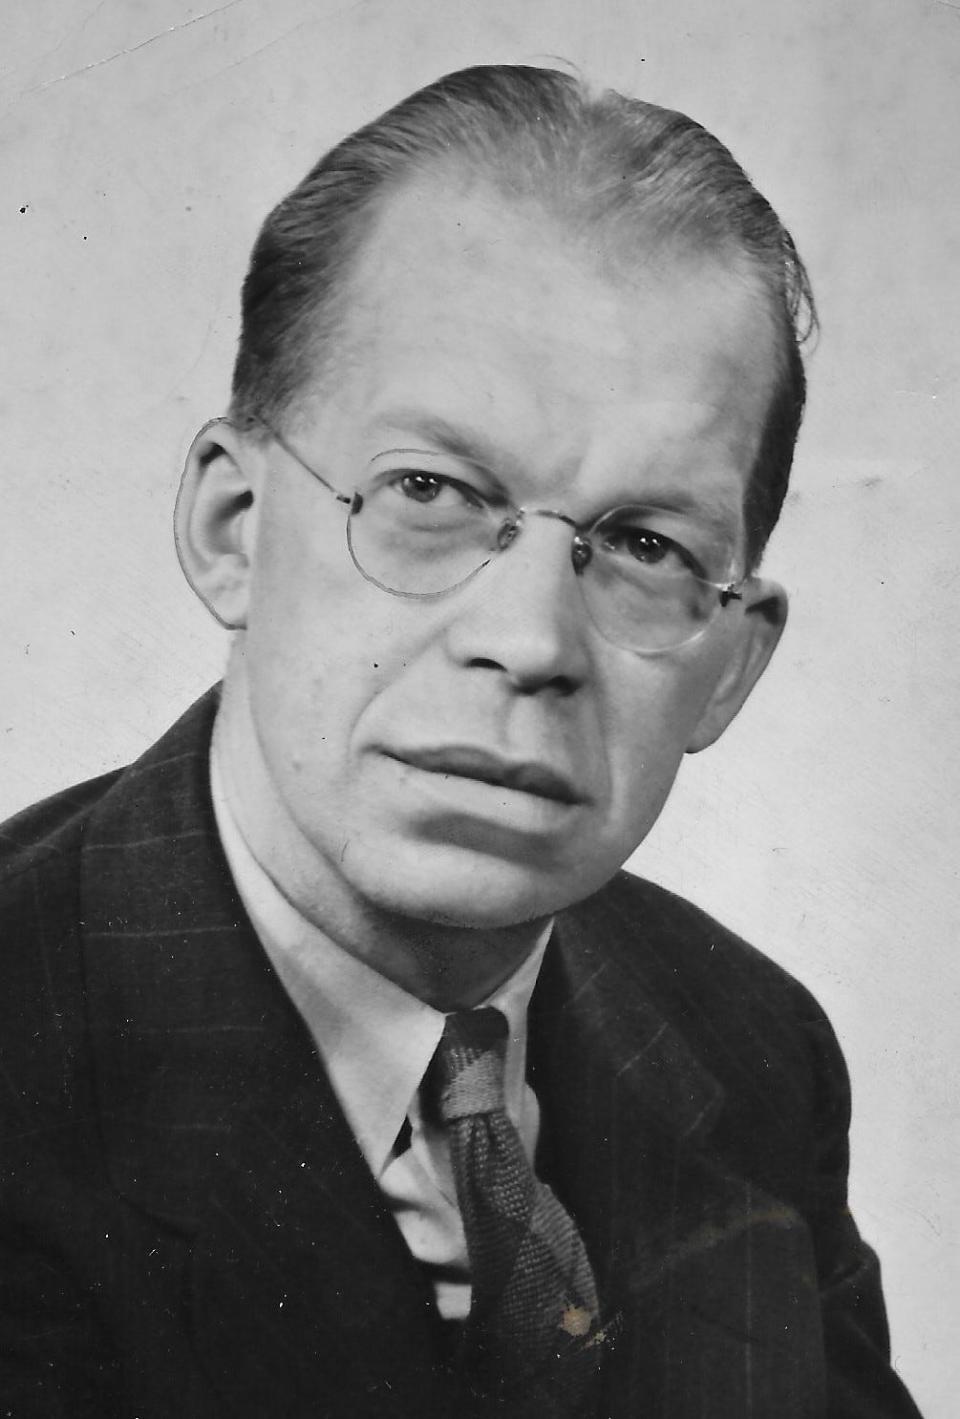 James S. Jackson, associate editor of the Akron Beacon Journal, sits for a studio portrait in 1944.